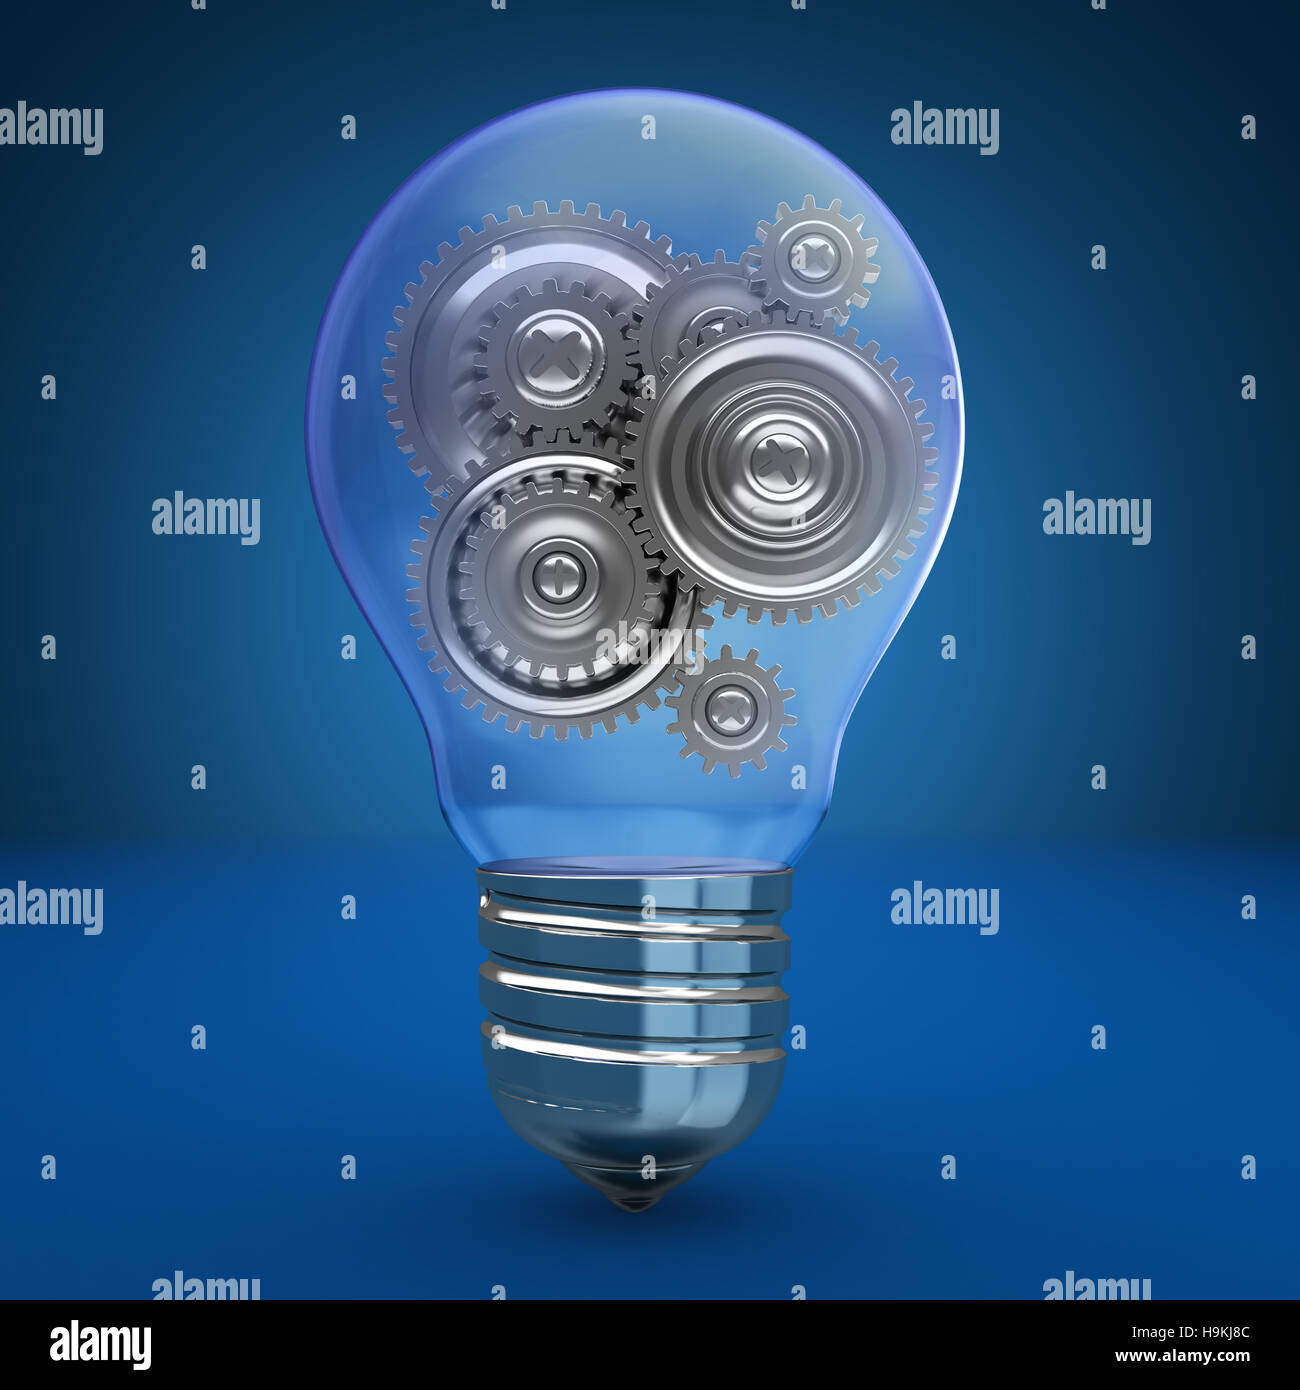 3d illustration of light bulb with gear wheels inside, over blue background Stock Photo